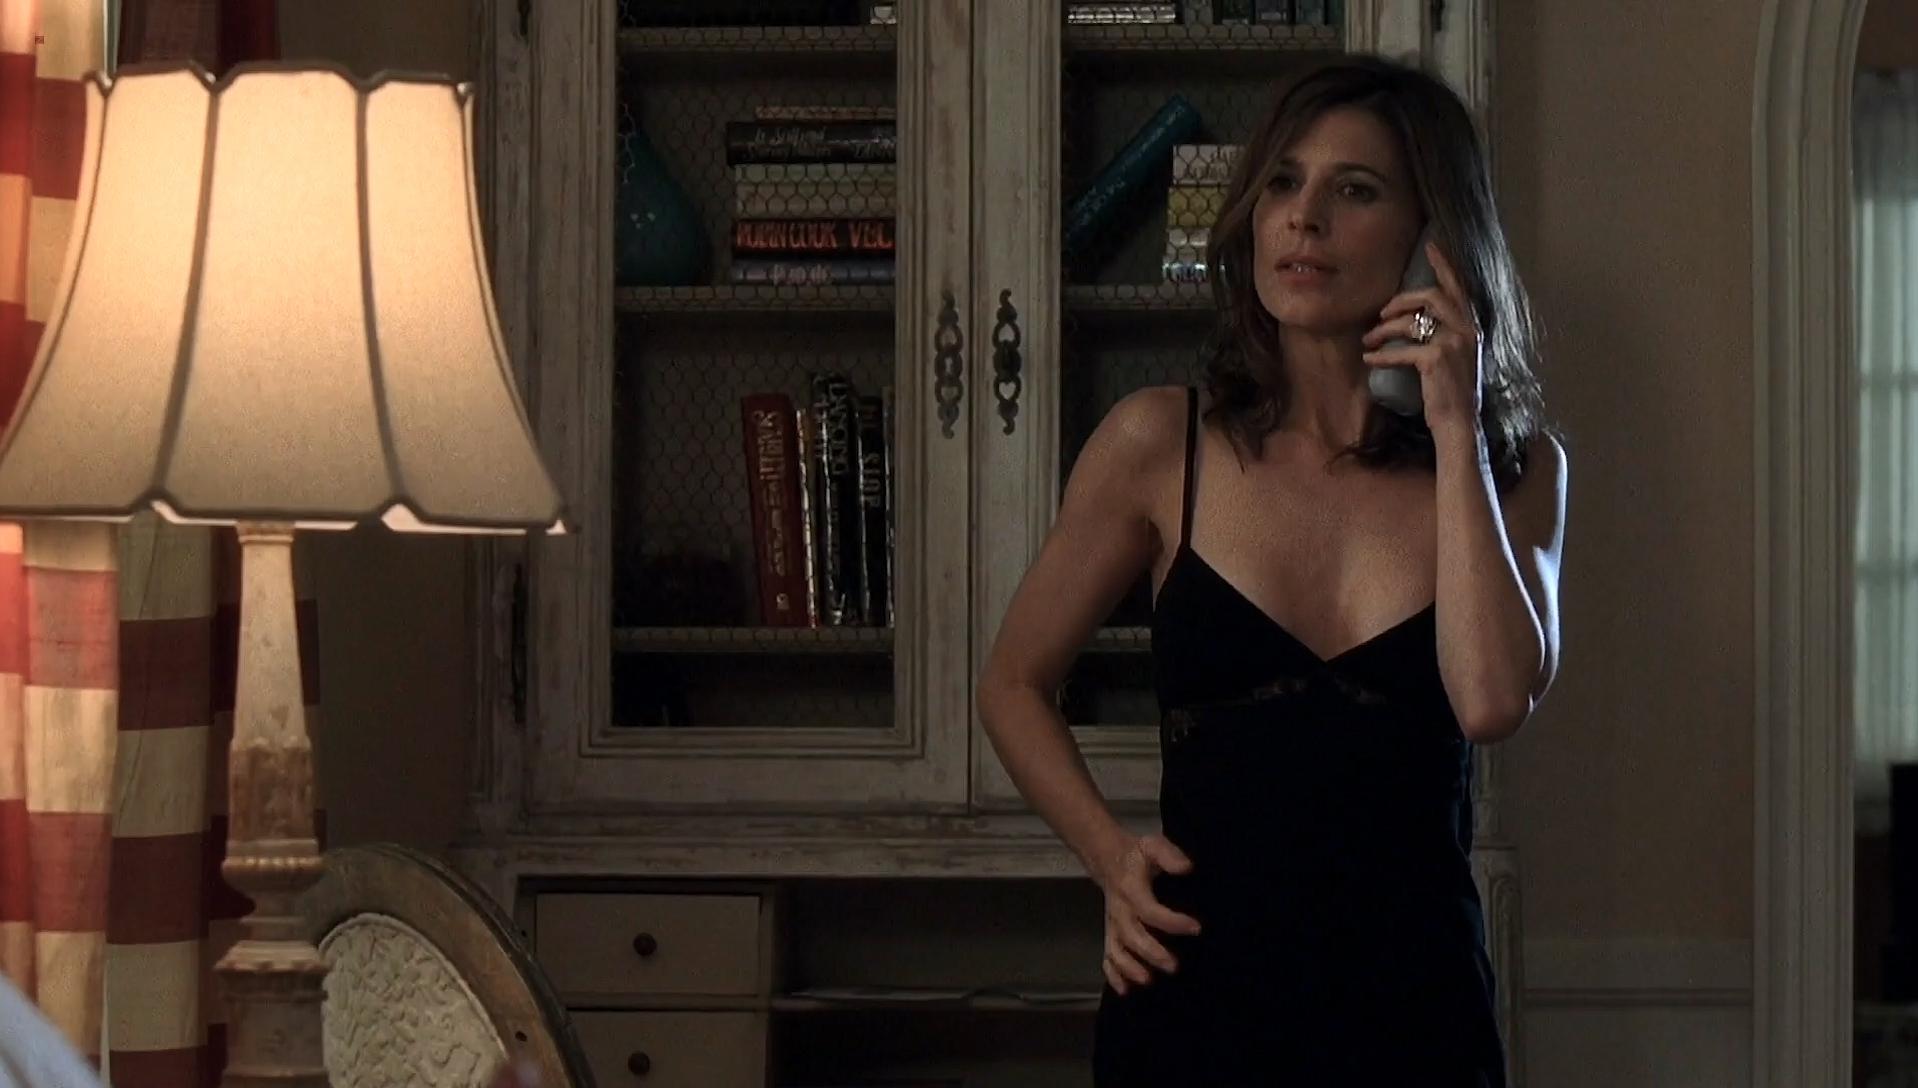 Perrey Reeves in sexy scene from Entourage s06-07 which was released in 201...